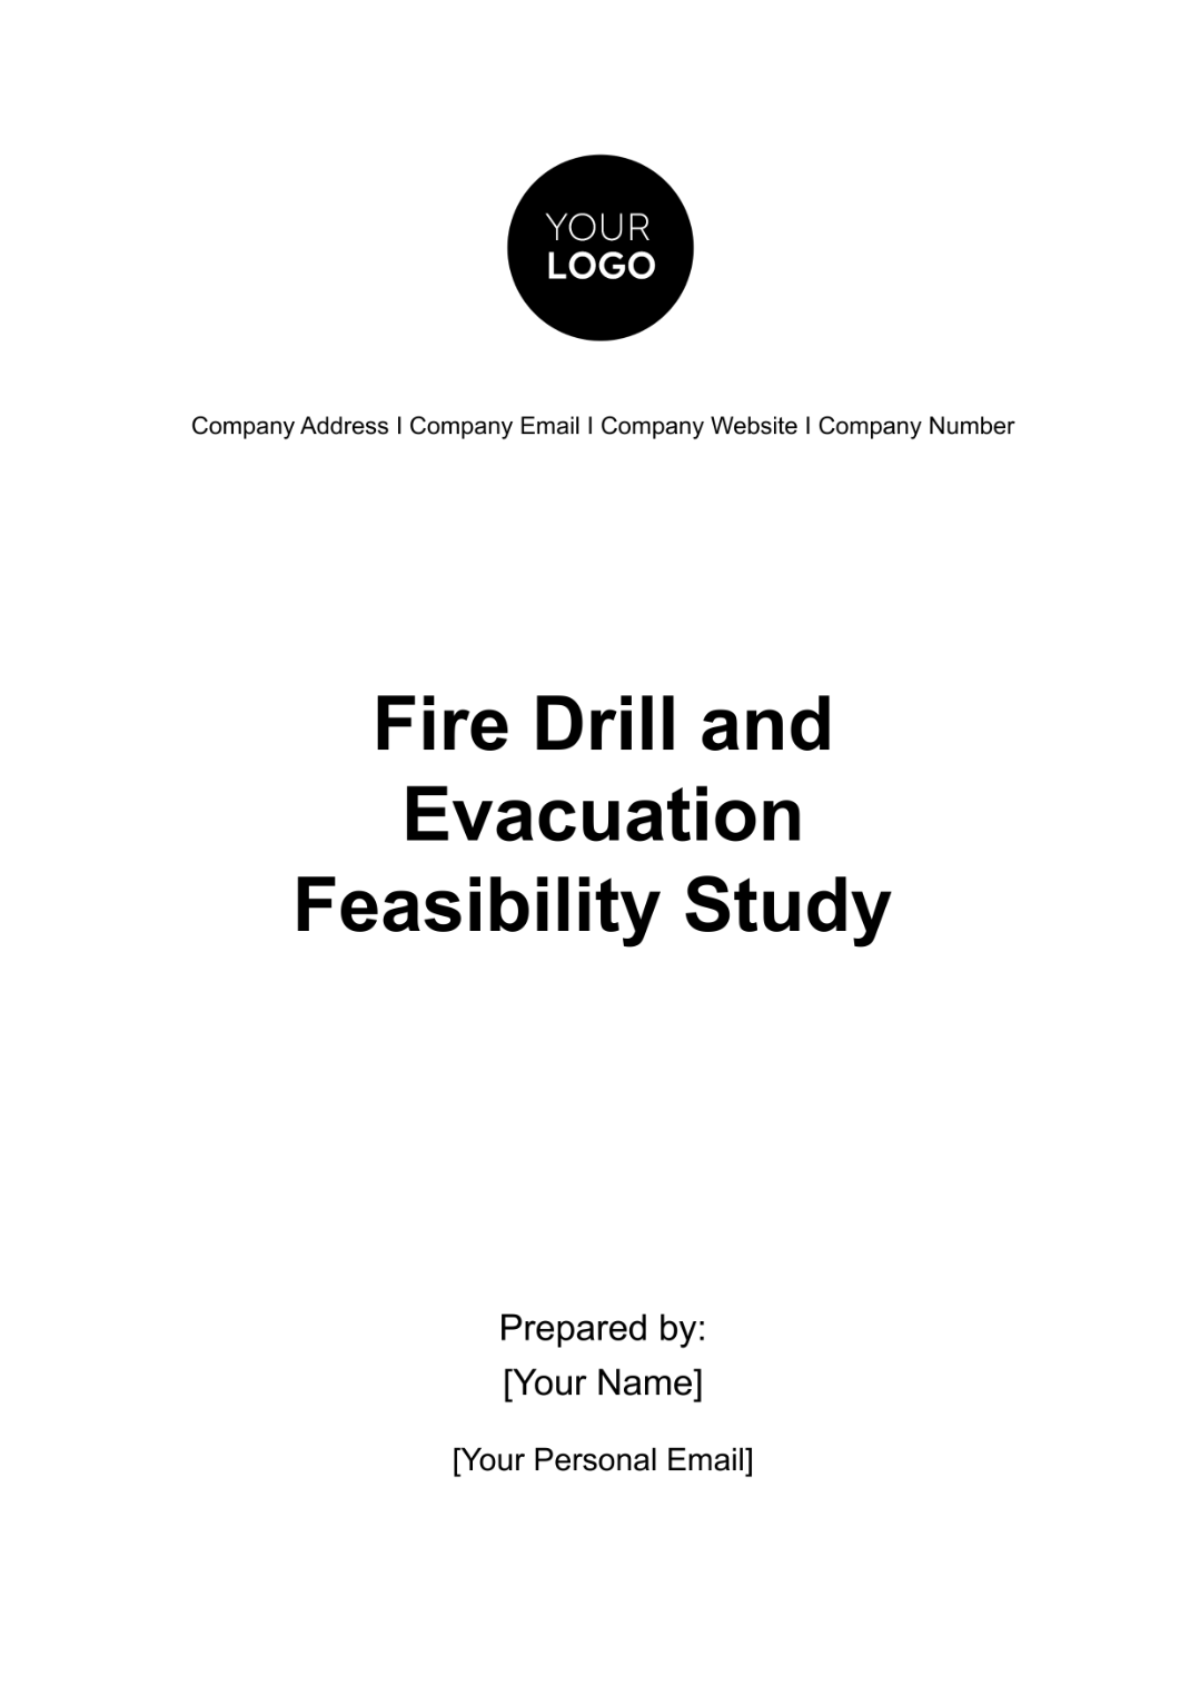 Fire Drill and Evacuation Feasibility Study HR Template